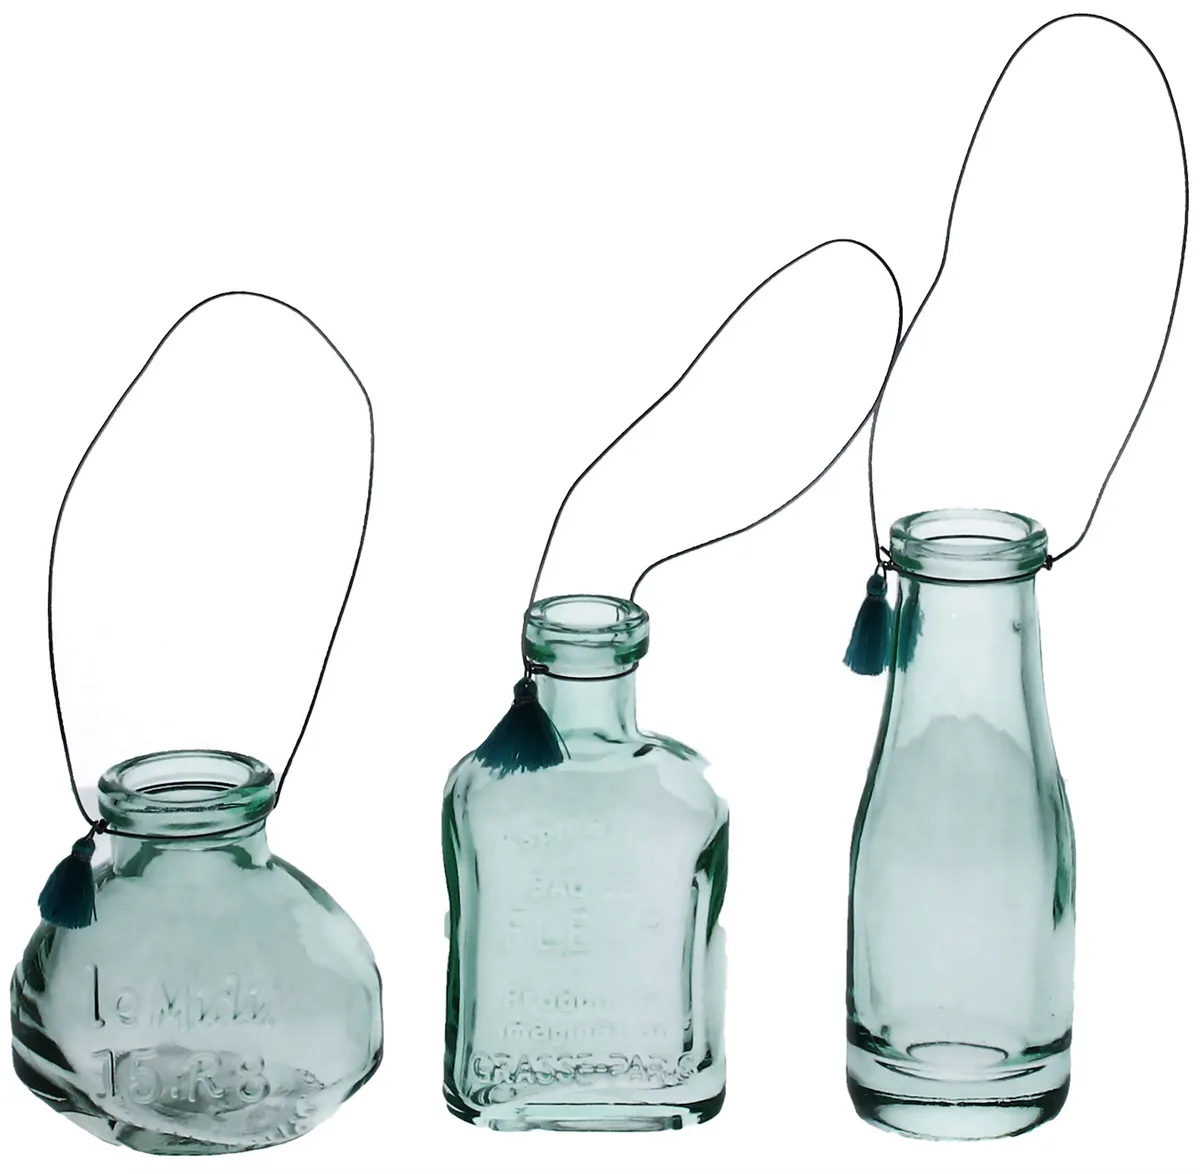 Display dainty blooms in this trio of petite, tasselled hanging bottle vases. £6.75 for three from The Contemporary Home